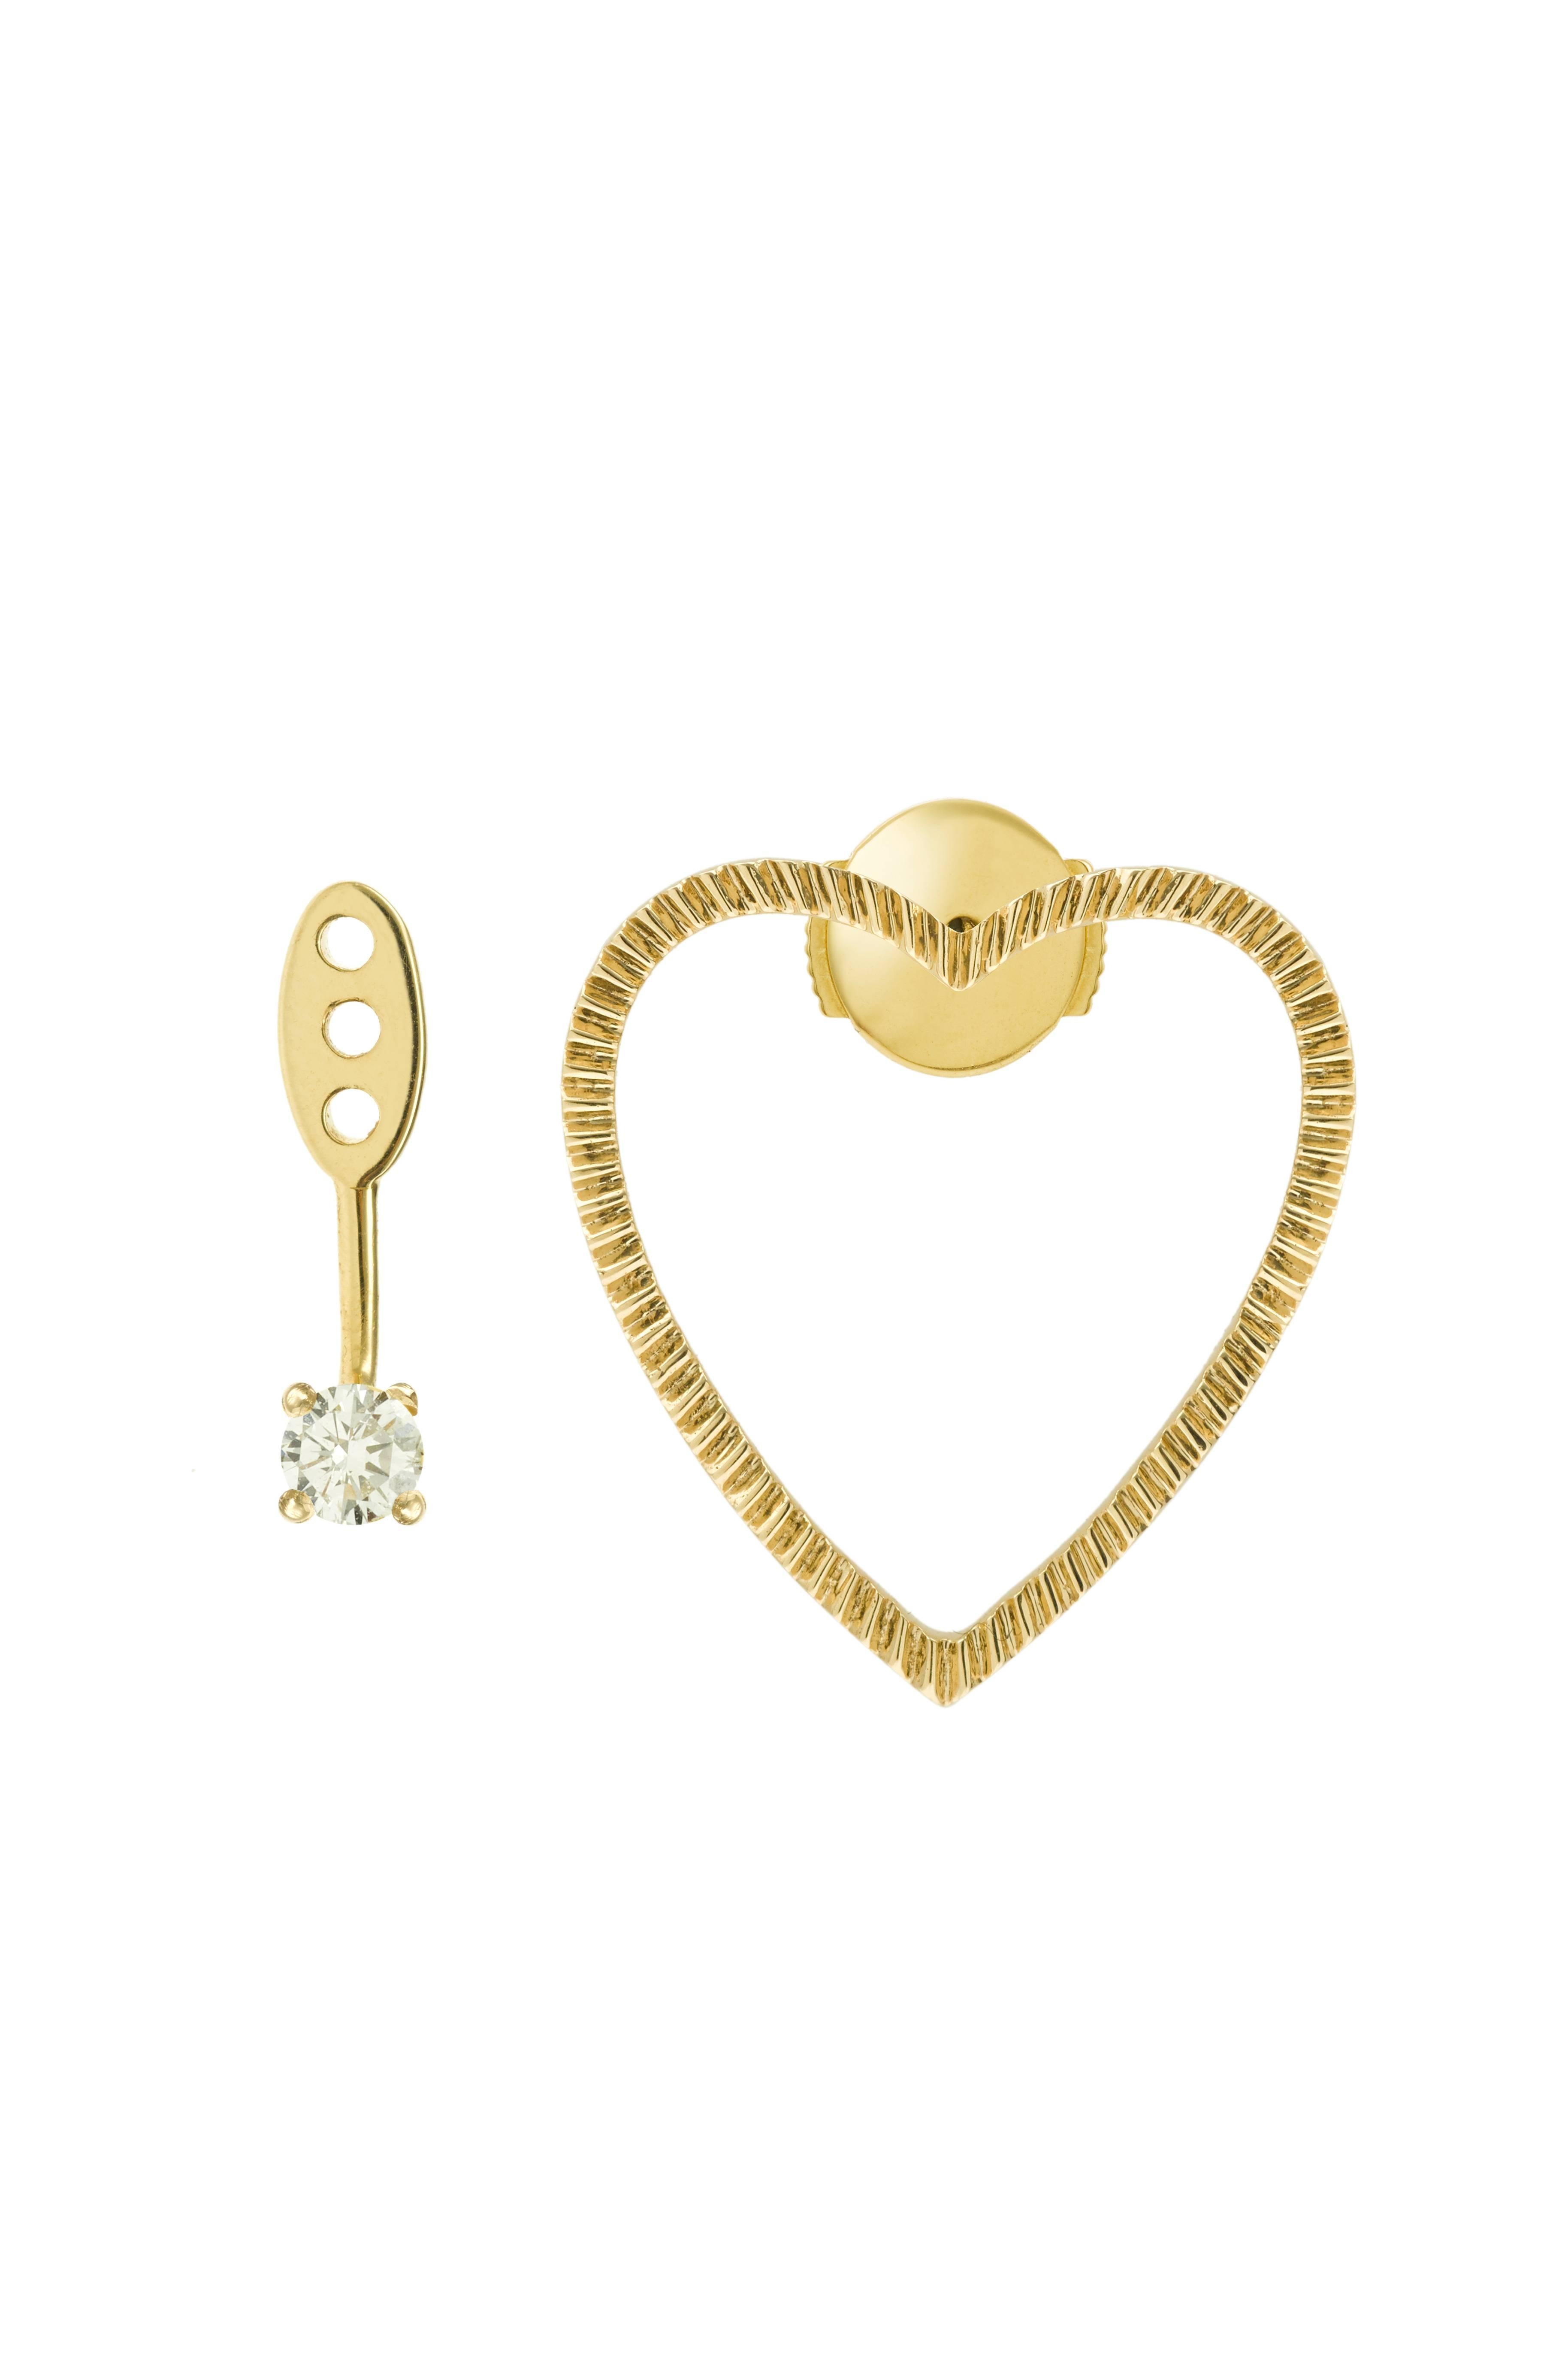 Pack of Earring and ear-jacket in Yellow gold 18 carats 2,8gr approx.
Diamonds 0,10 carats approx.
Alpa System
Sold as a pack by unit individually 